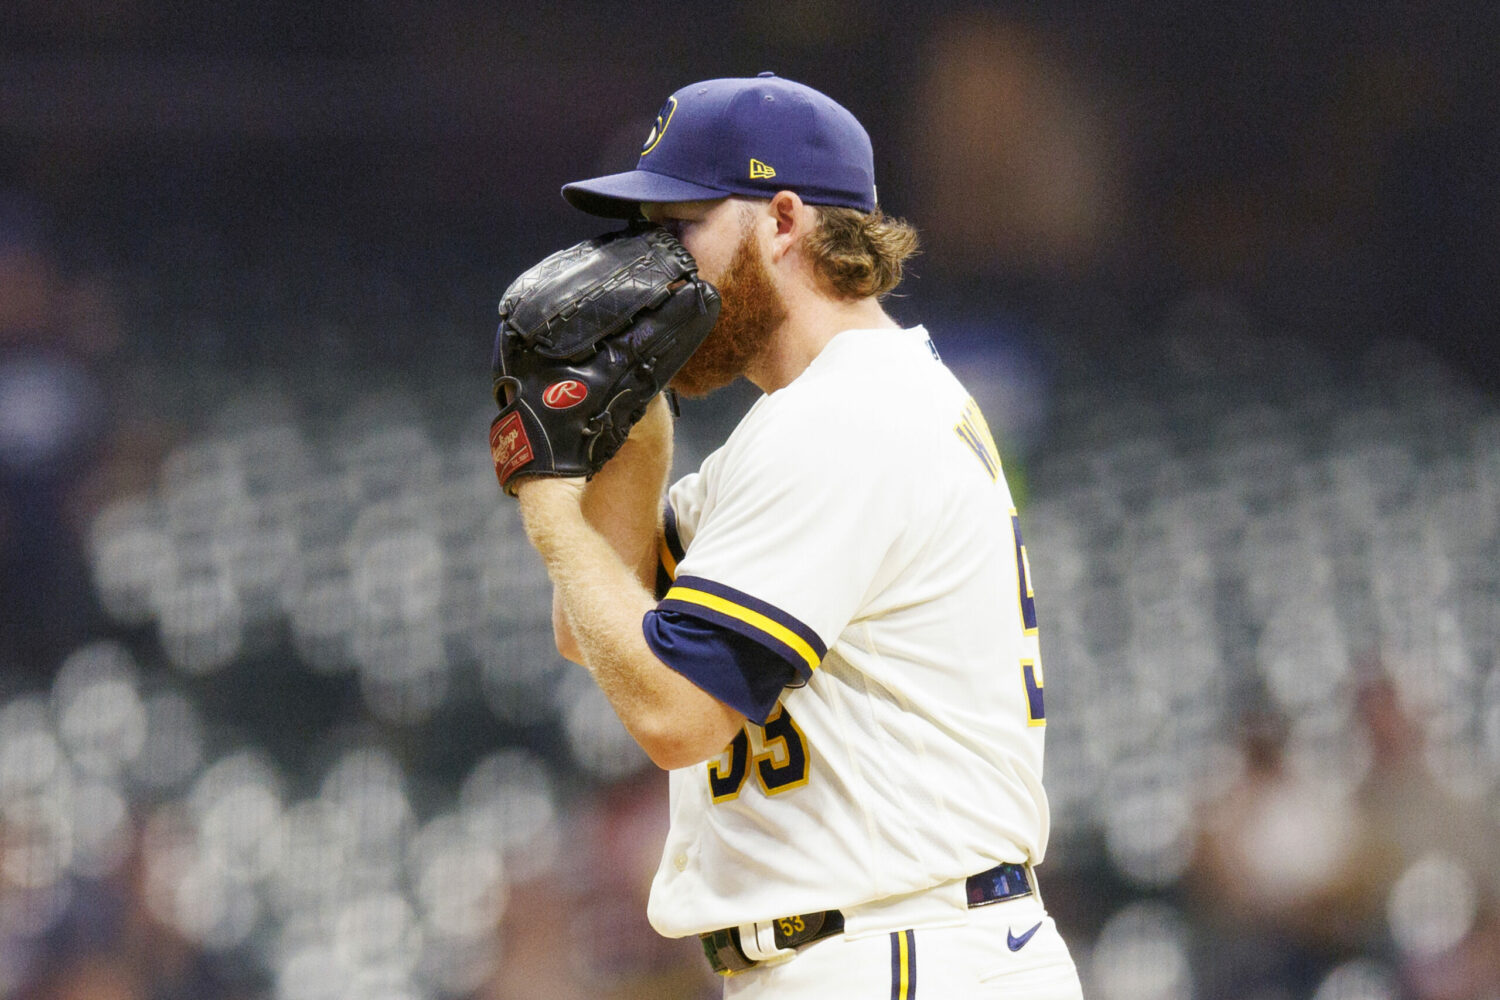 Brandon Woodruff's surgery could have Craig Counsell repercussions